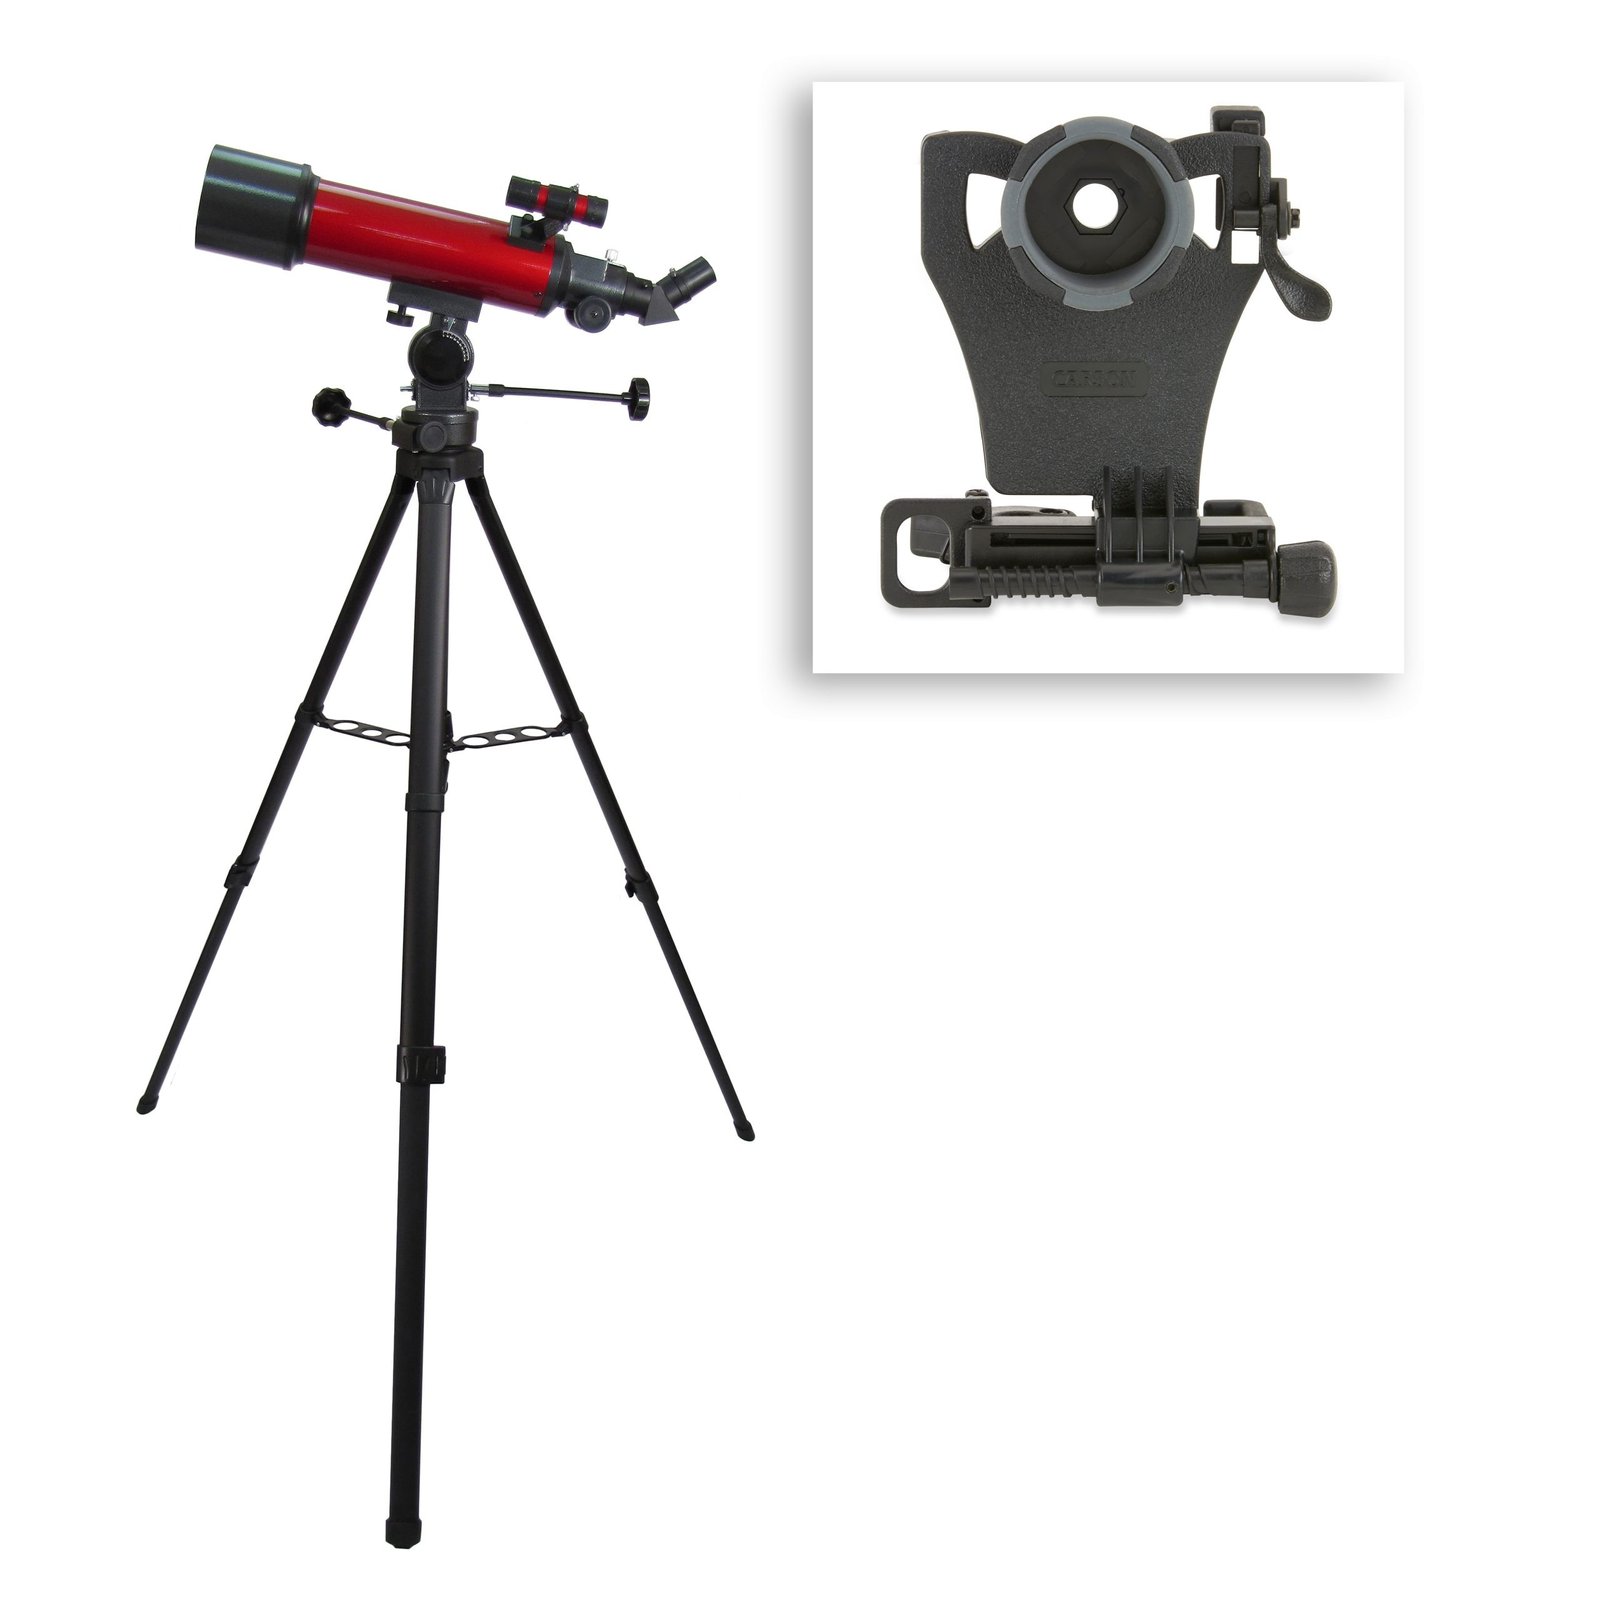 Smartphone Universal Adapter Digiscoping Carson 25-56x80mm Planet TheRealOptics Telescope, – Refractor Series Red